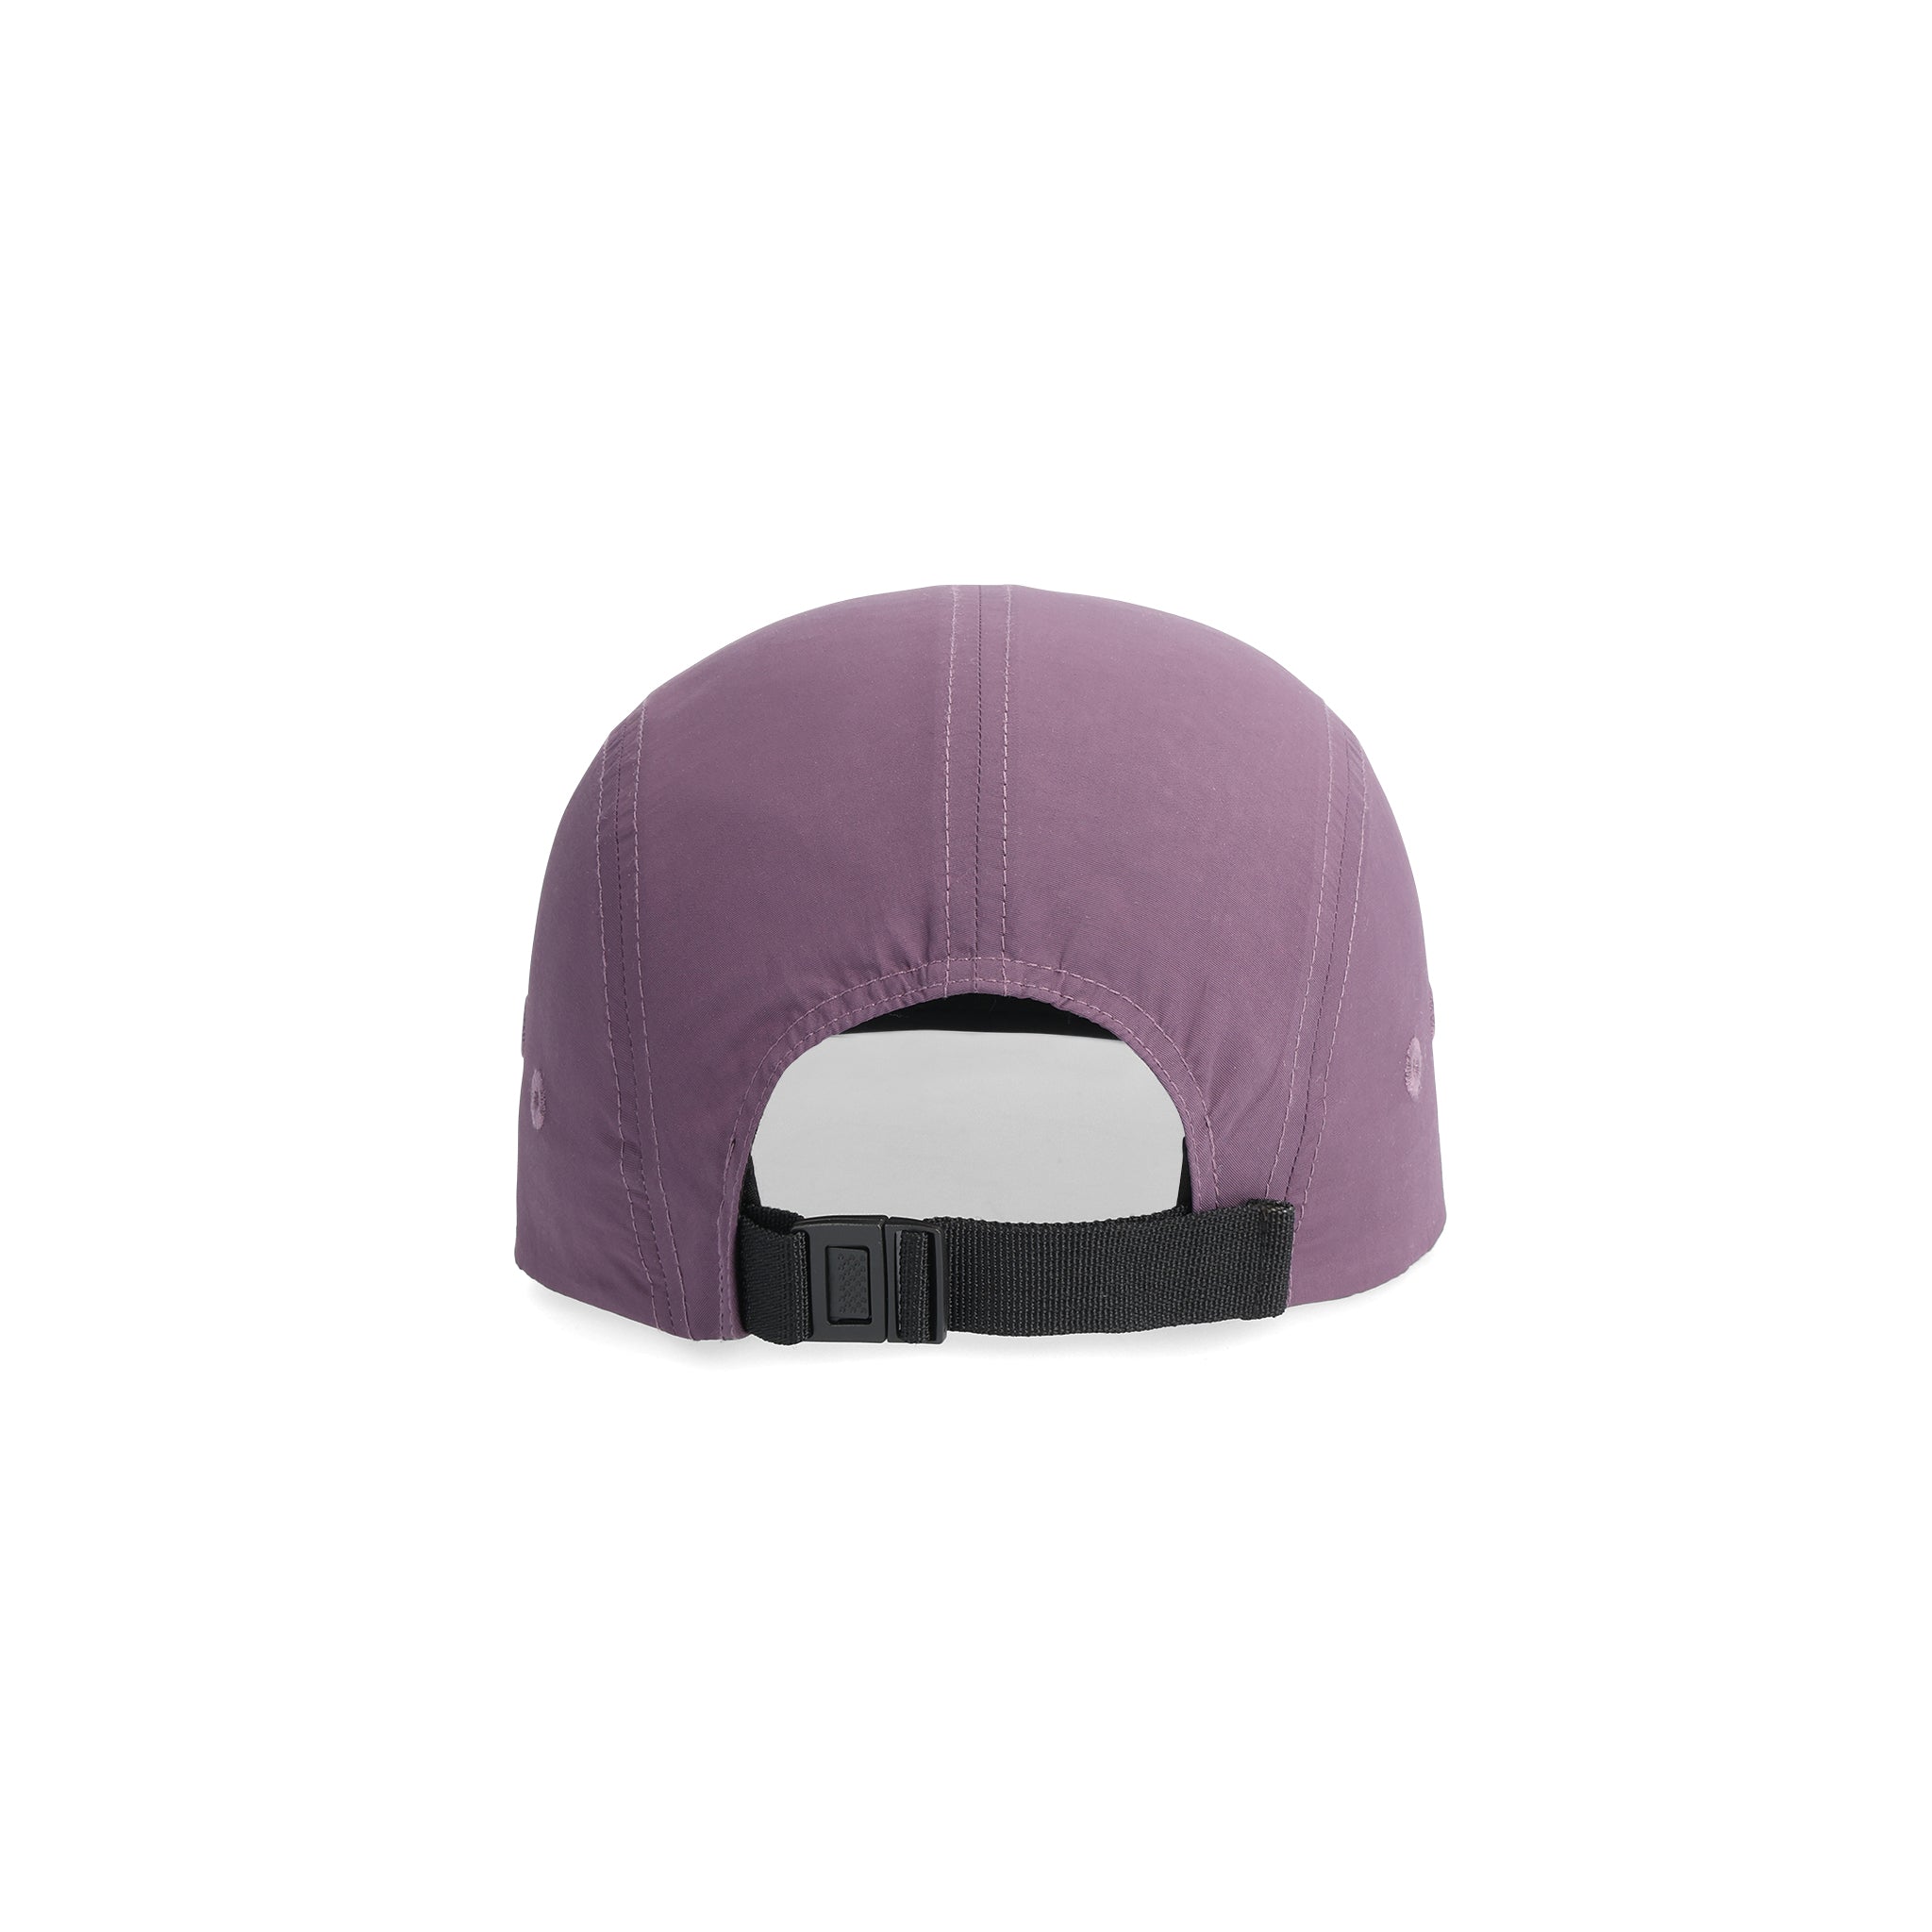 Back View of Topo Designs Nylon Camp Hat in "Loganberry"